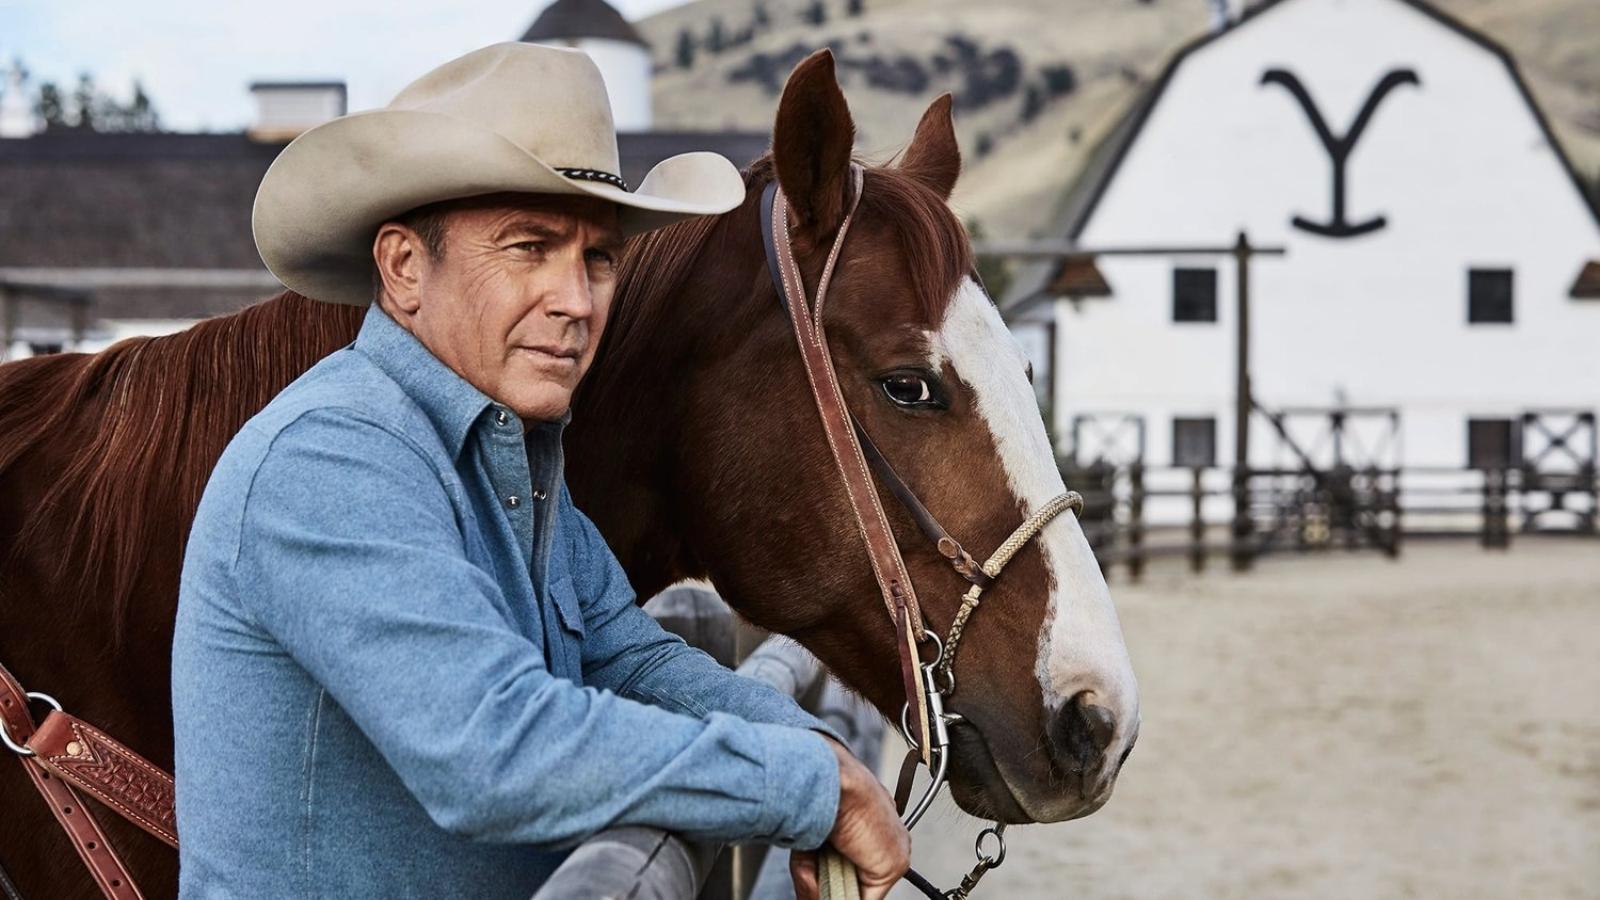 Yellowstone 2024: Kevin Costner as John Dutton in Yellowstone, standing next to a horse outside a barn with the Yellowstone logo